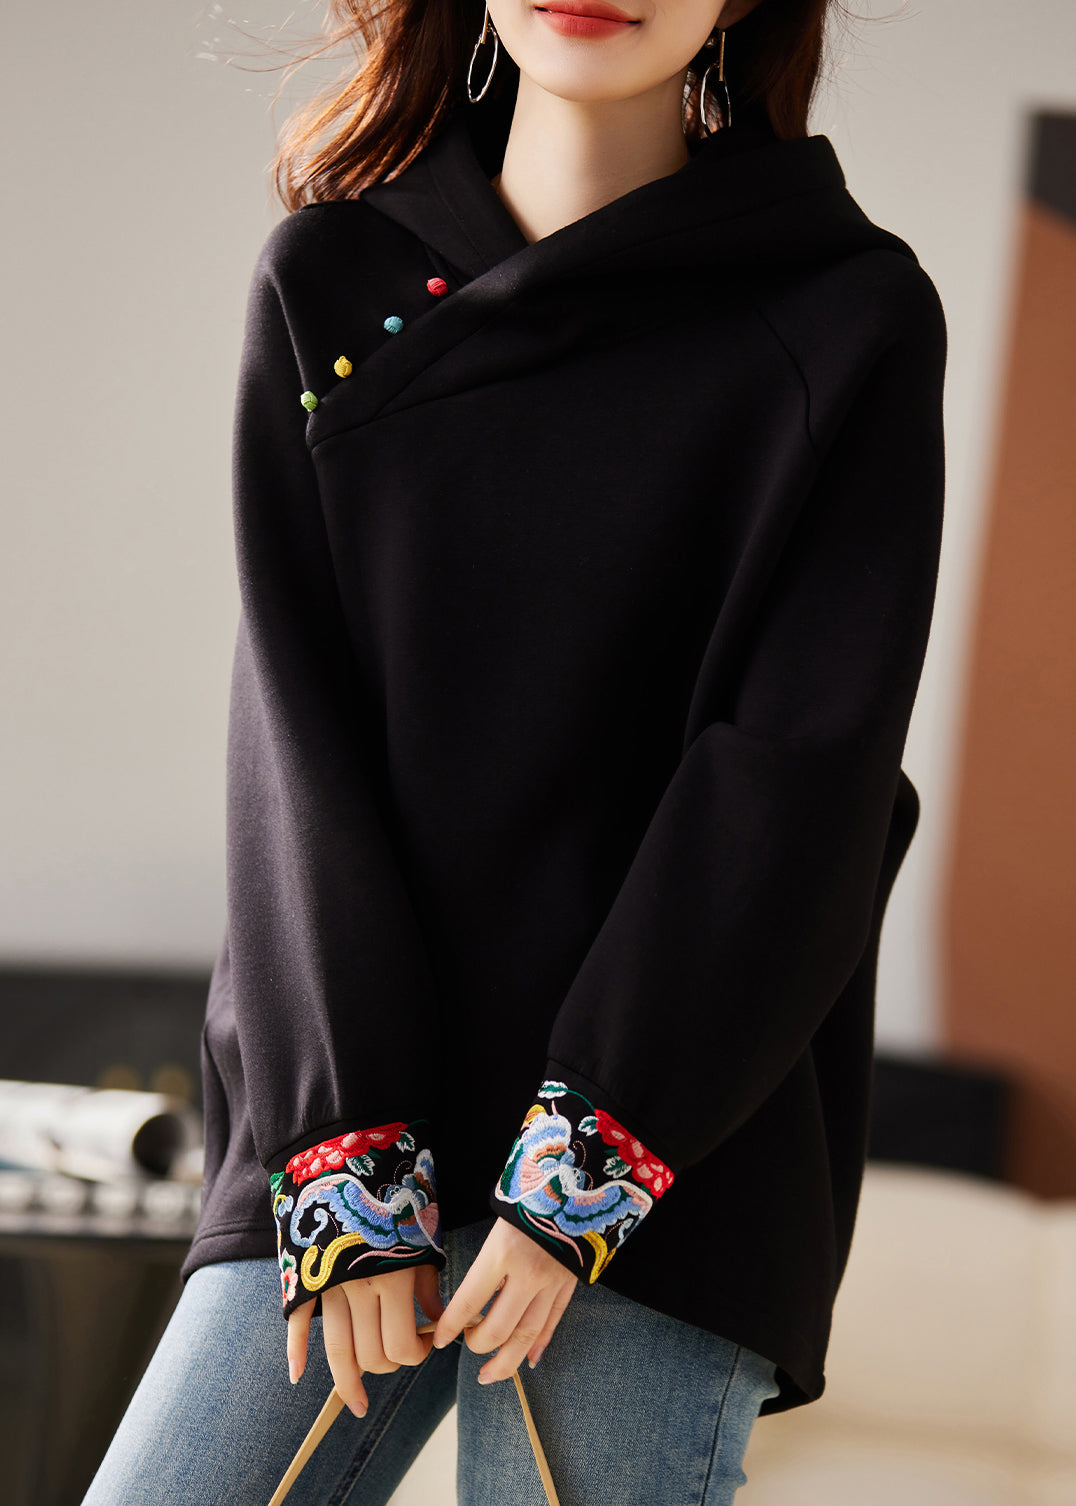 Boutique Black Hooded Embroideried Warm Fleece Sweatshirts Top Spring